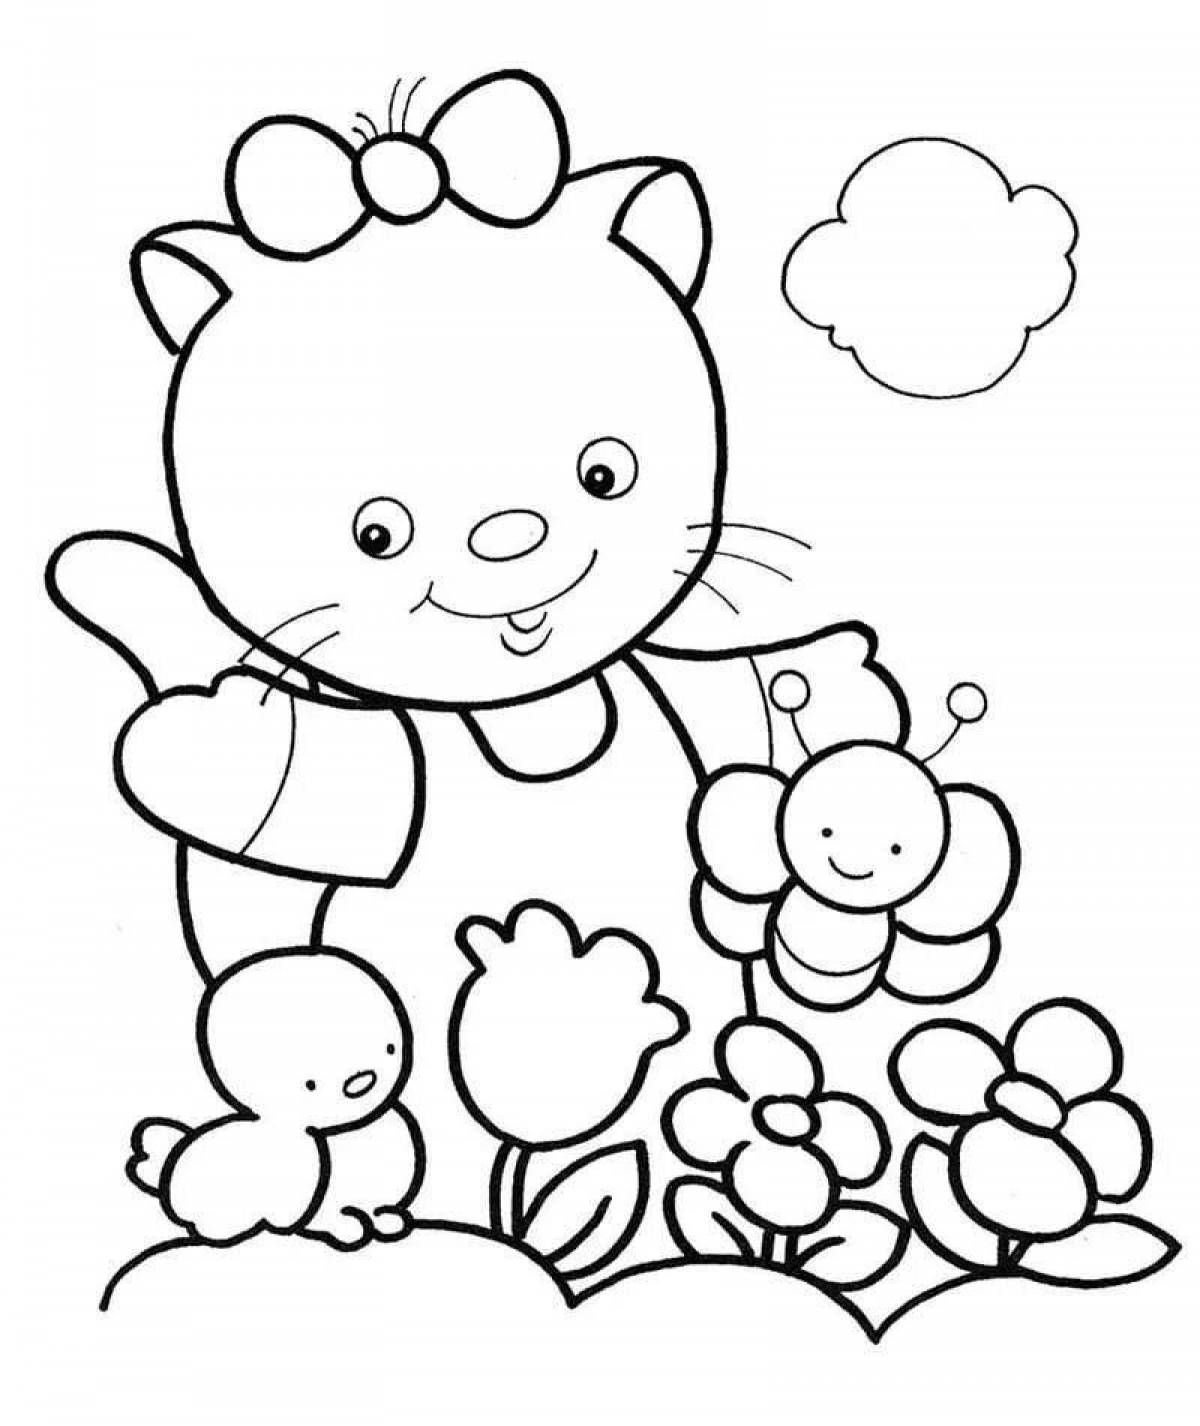 Colorful fun coloring book for kids 5